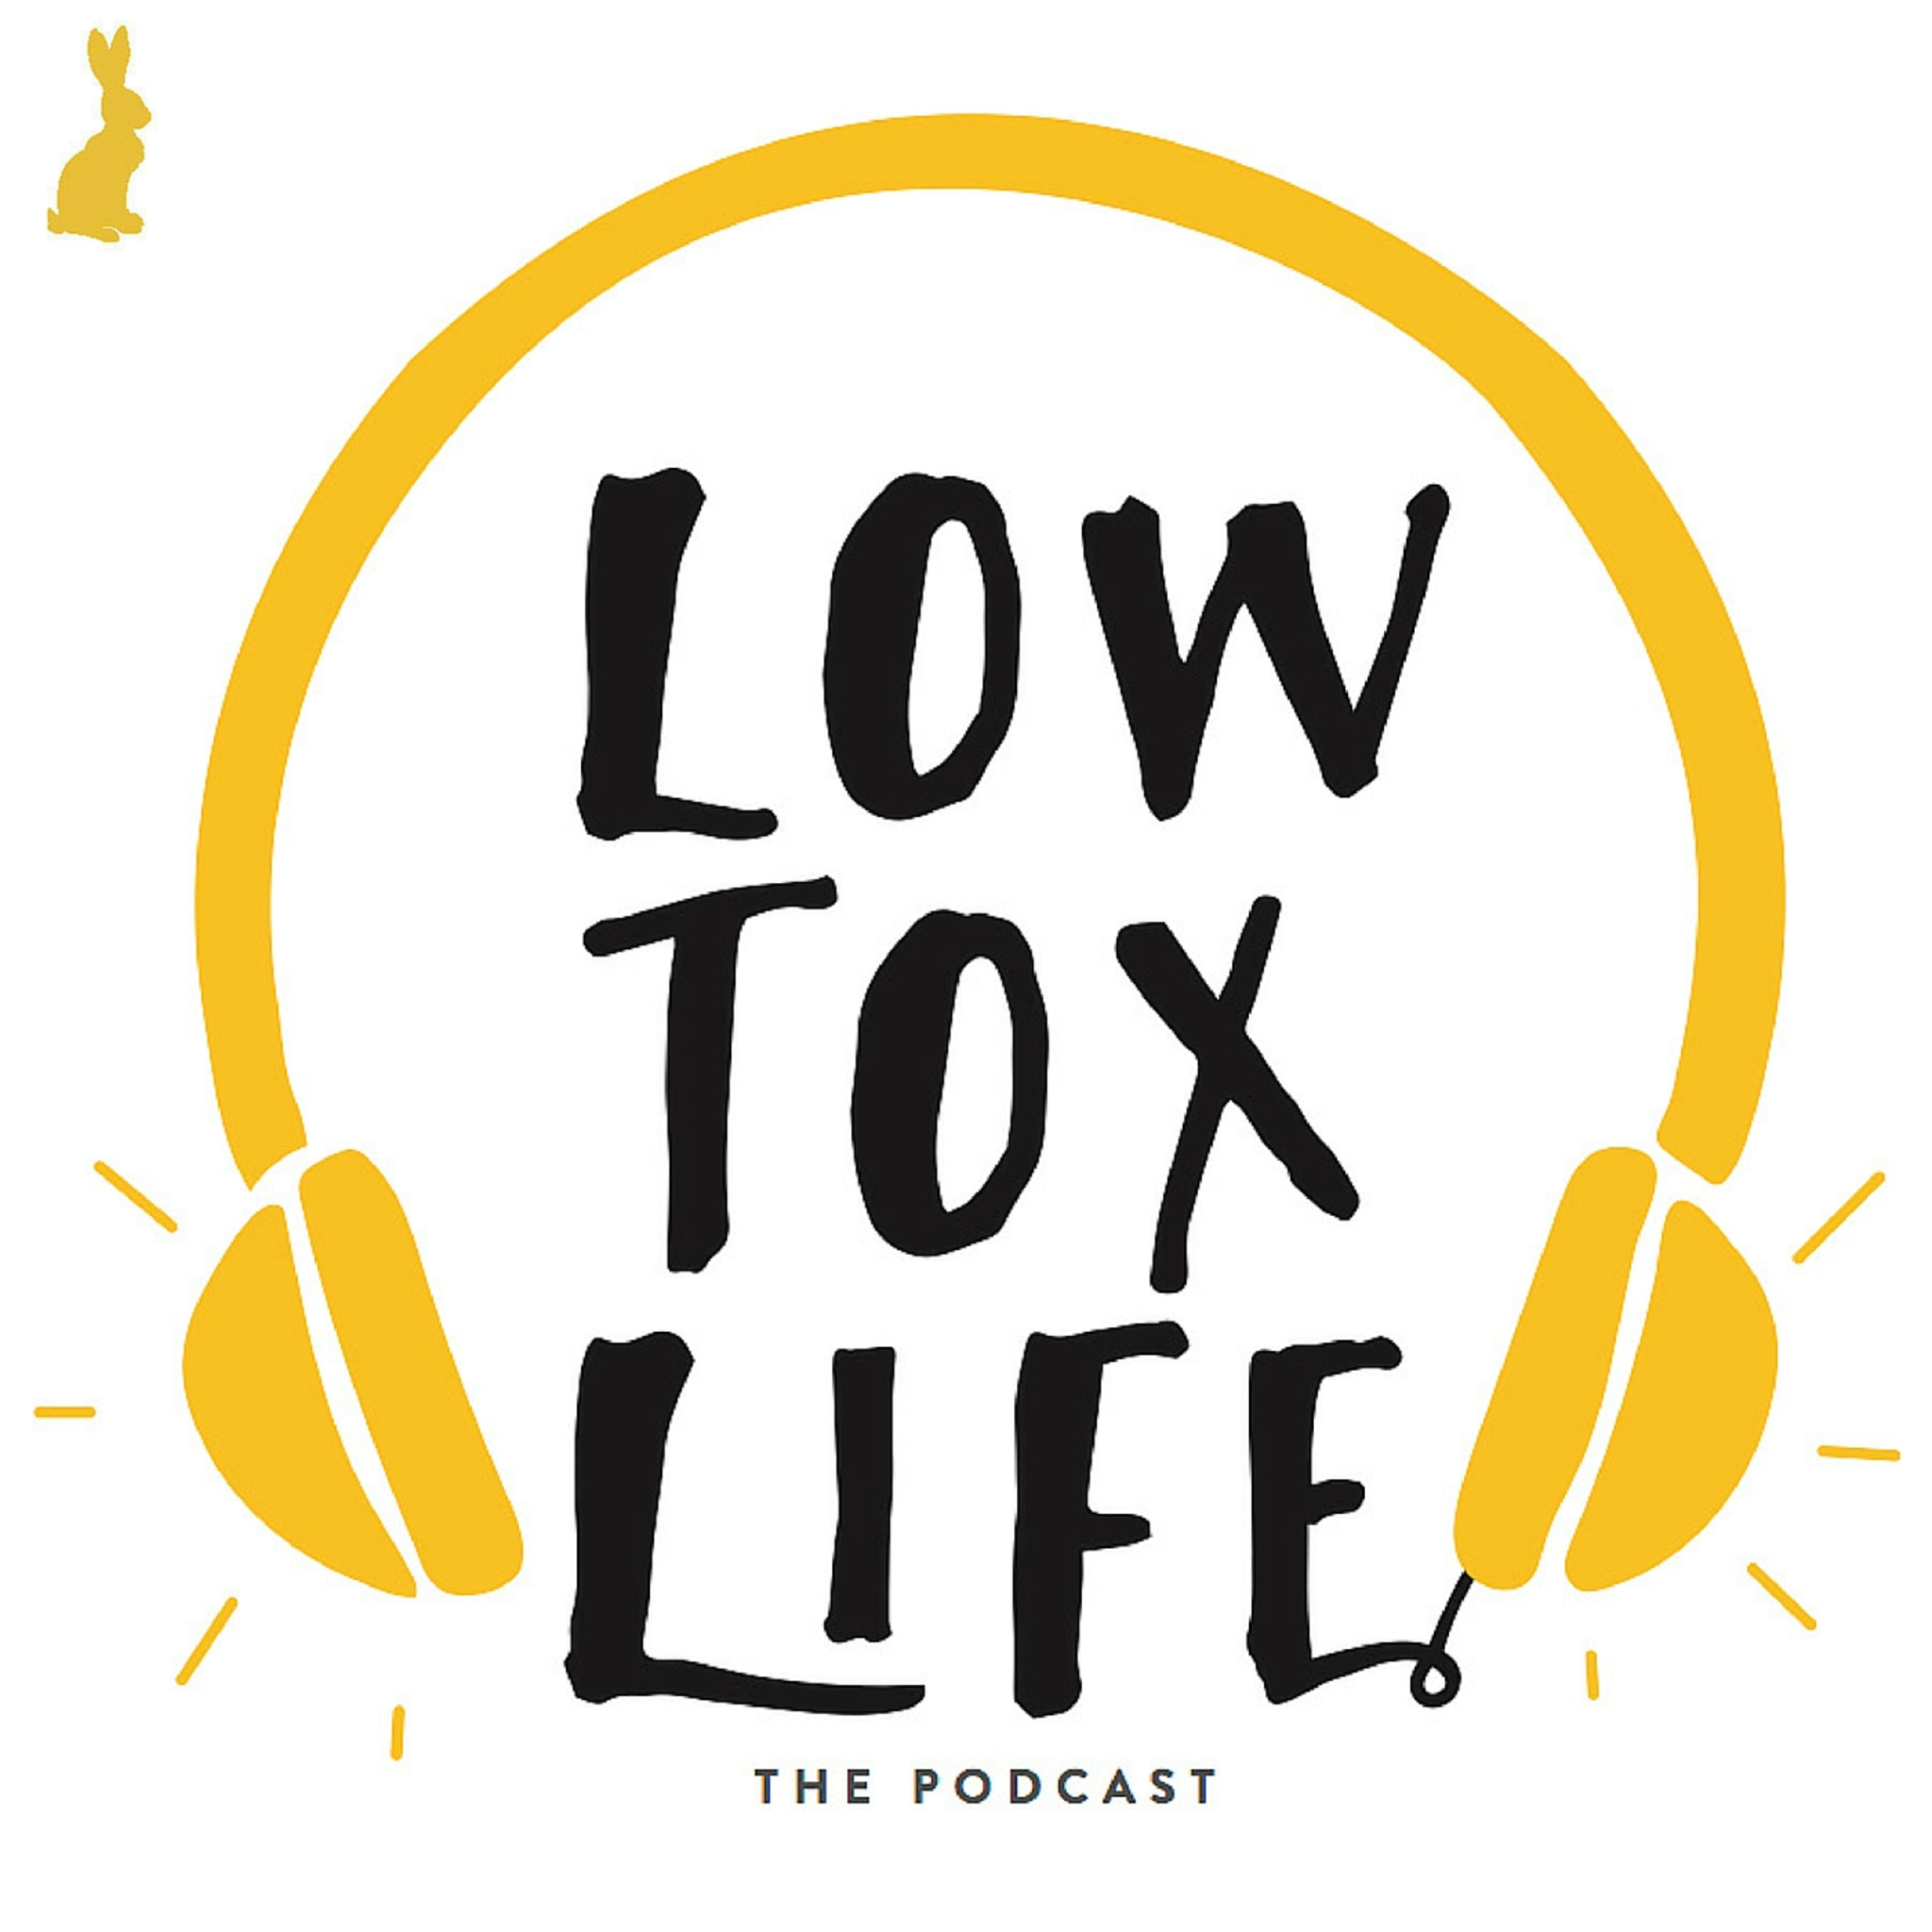 Show #56: 10 Toxic Truths with Professor Marc Cohen